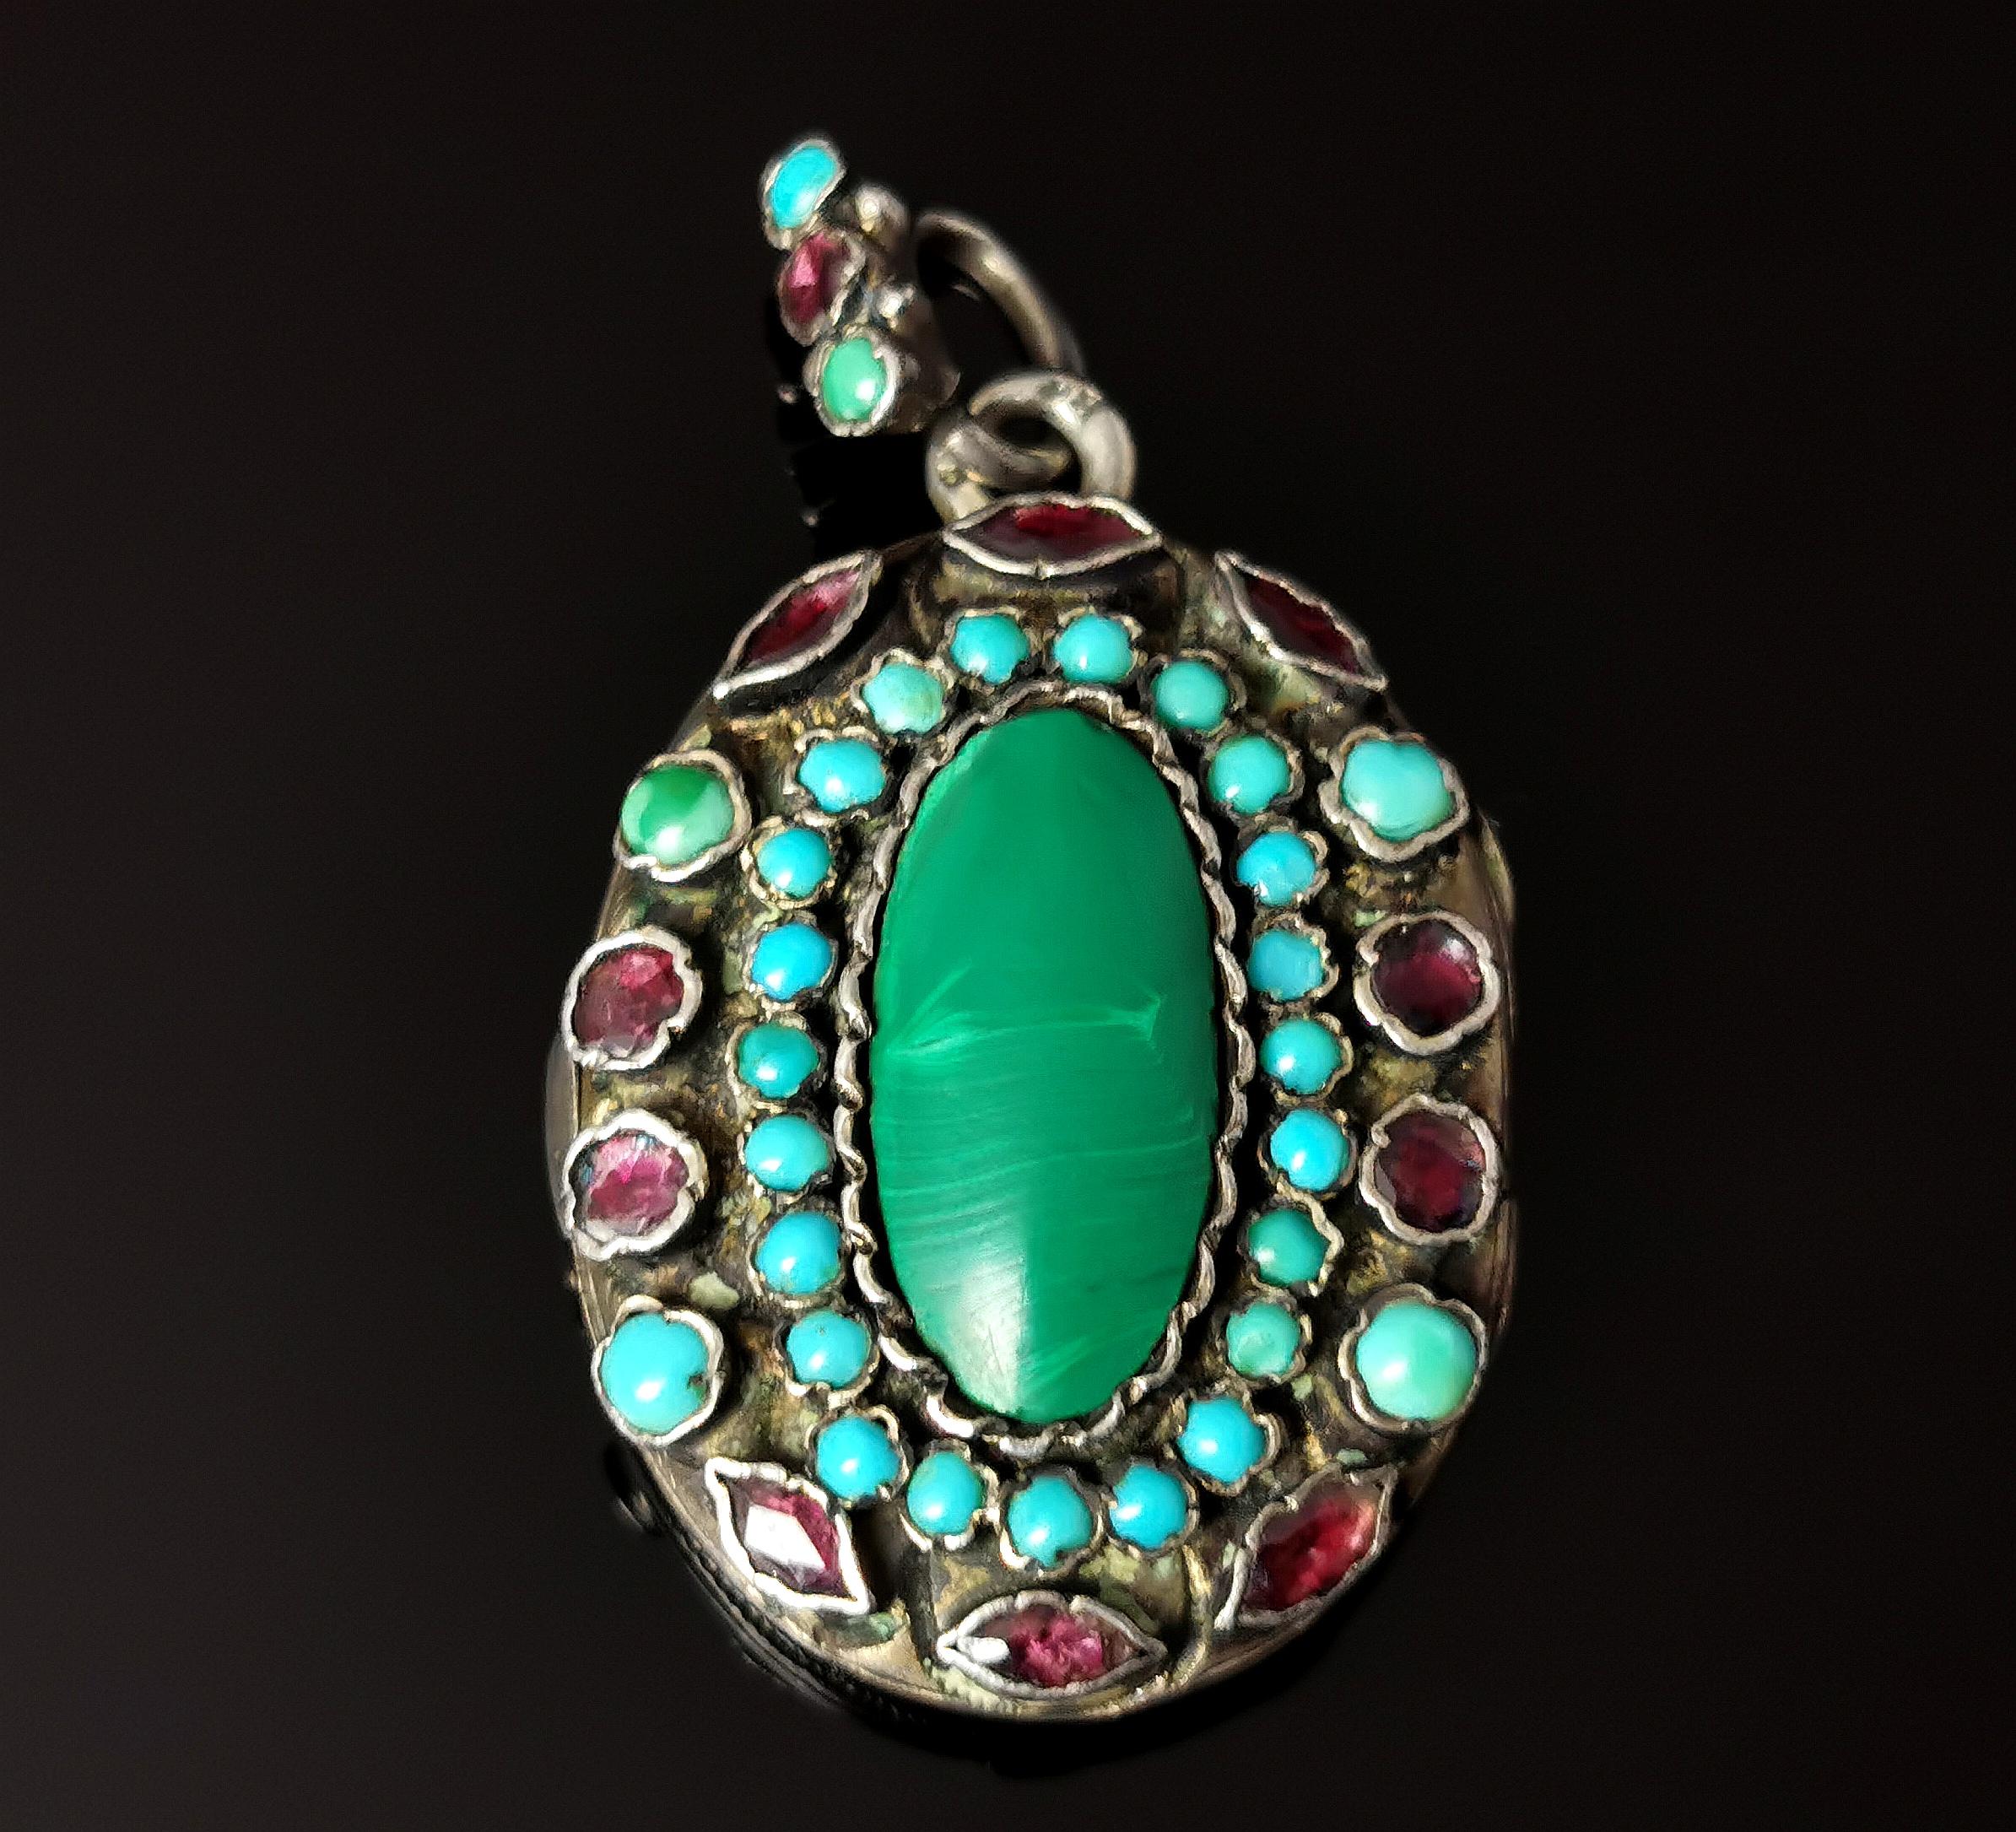 A gorgeous and unusual antique Austro-Hungarian locket pendant.

Reminiscent of the renaissance revival styles this locket is heavily gem set to the front, gems include Garnet, Turquoise and malachite.

The garnets are almandine garnets adorning the